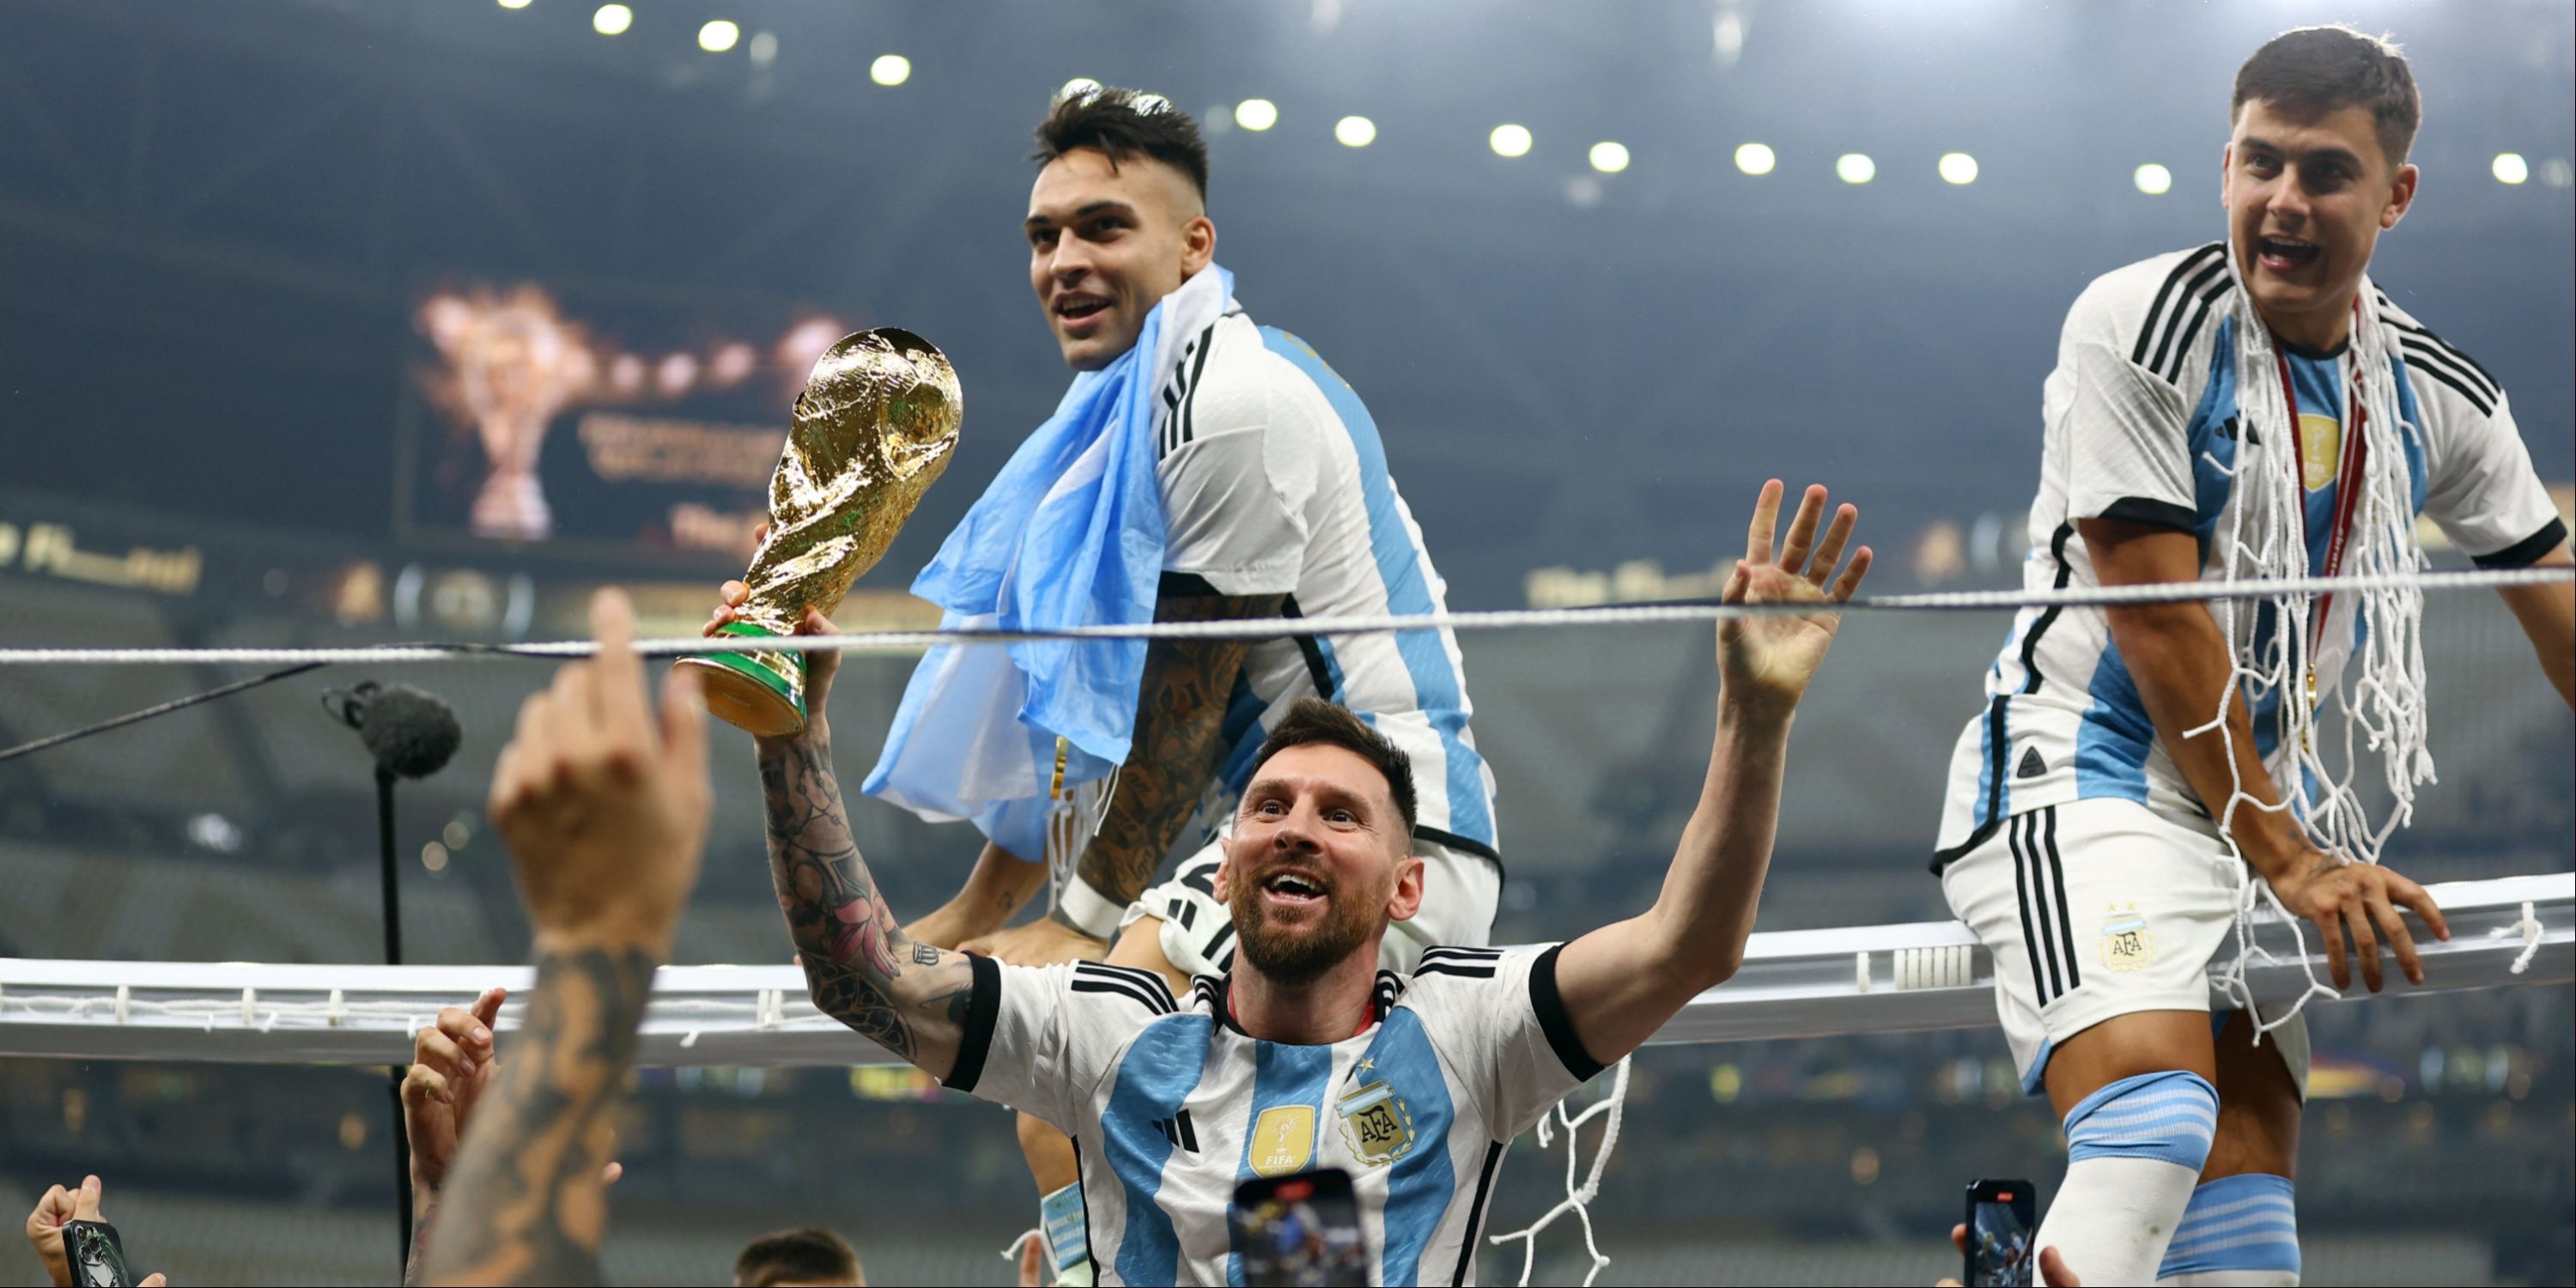 Argentina's Lionel Messi celebrates winning the World Cup with the trophy as Argentina's Lautaro Martinez and Paulo Dybala